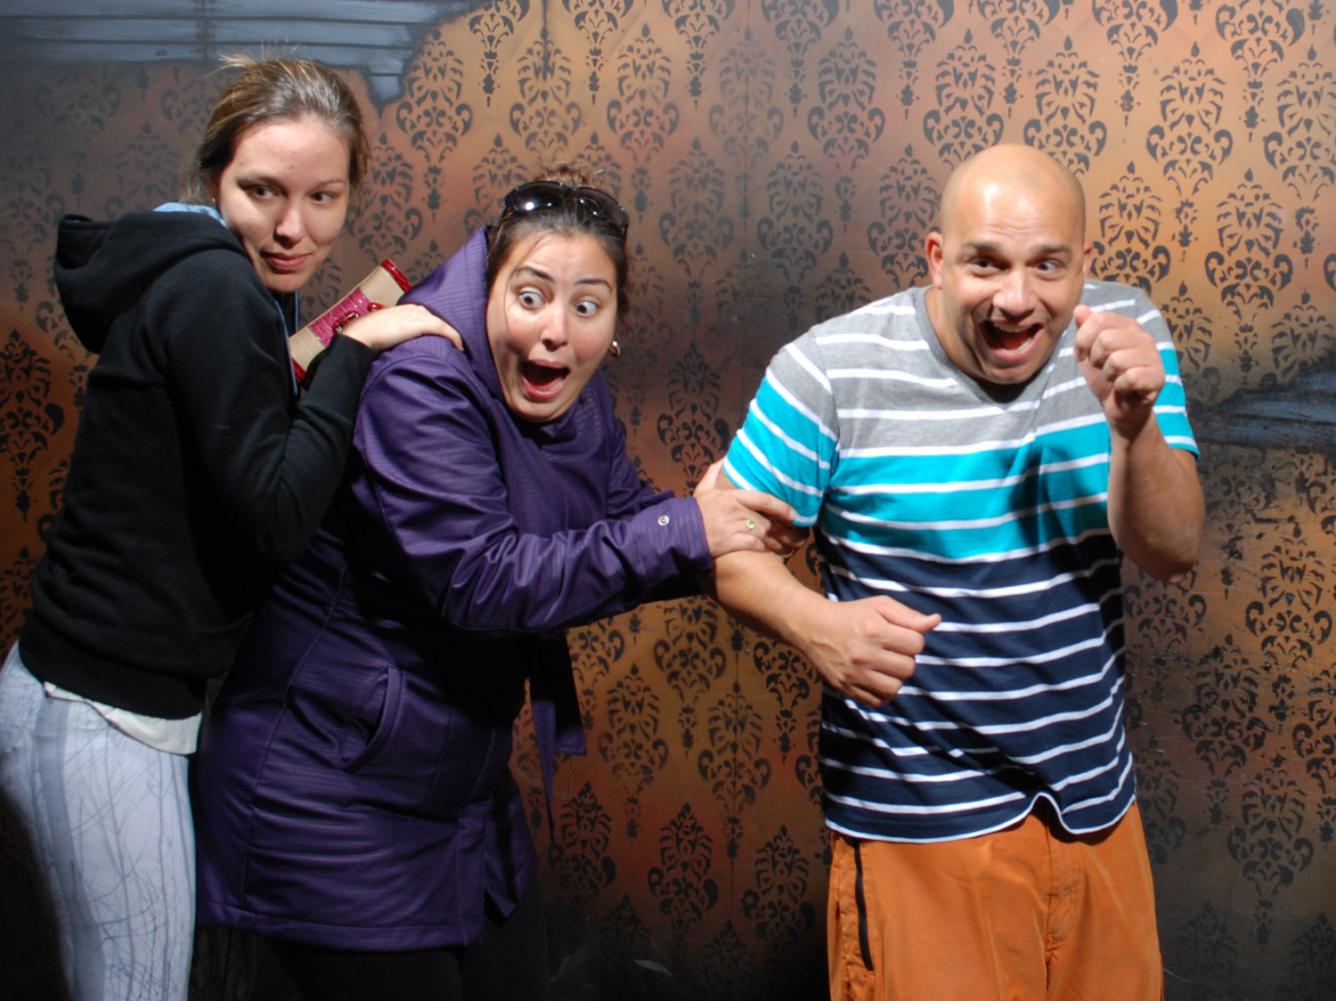 Nightmares Fear Factory Top 40 September 2013 pic0352